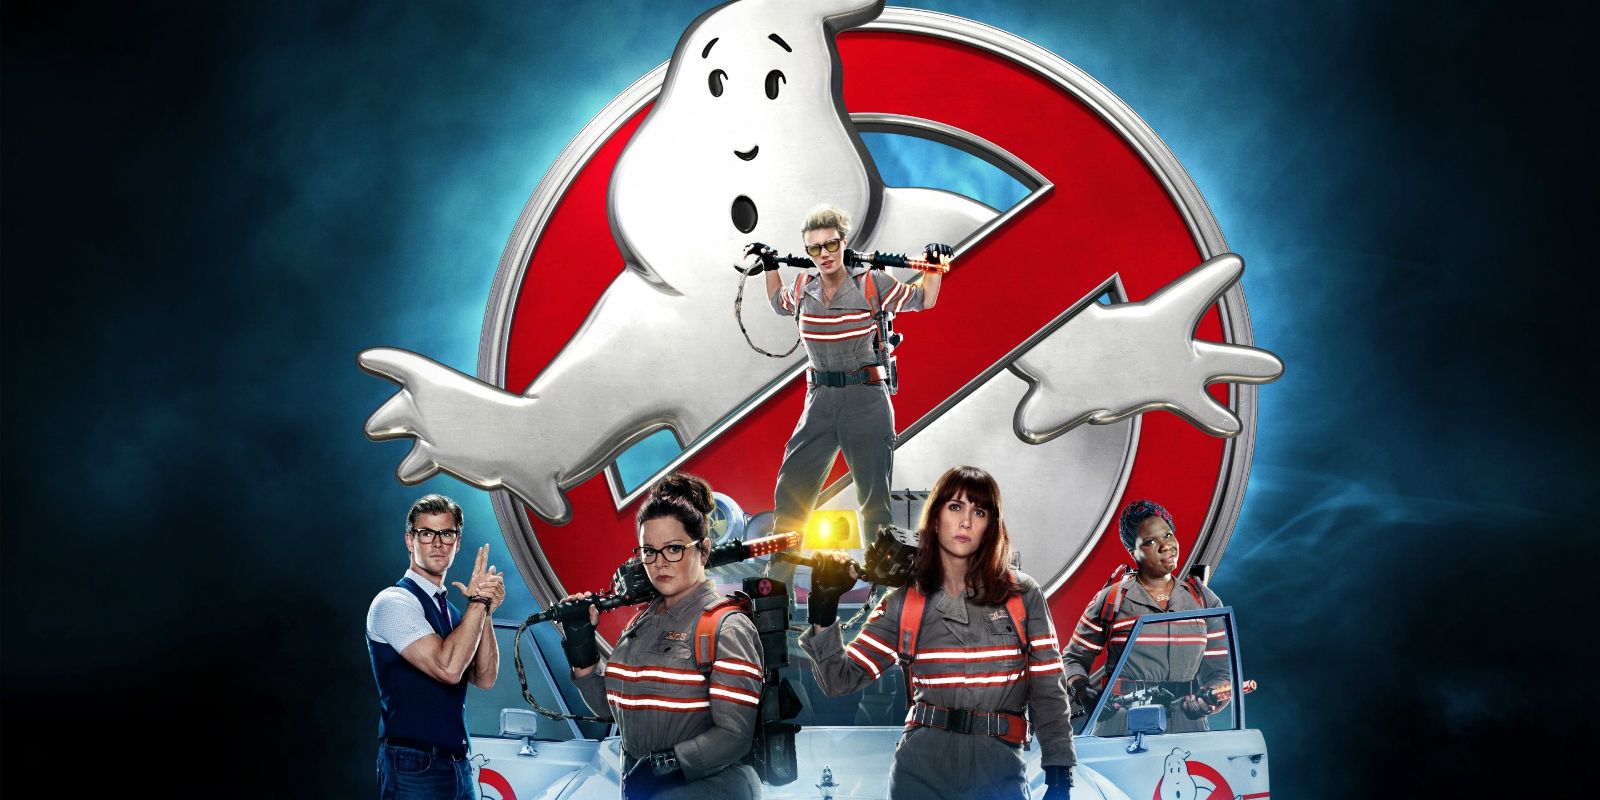 Ghostbusters (2016) sequel unlikely, animated spinoffs still planned